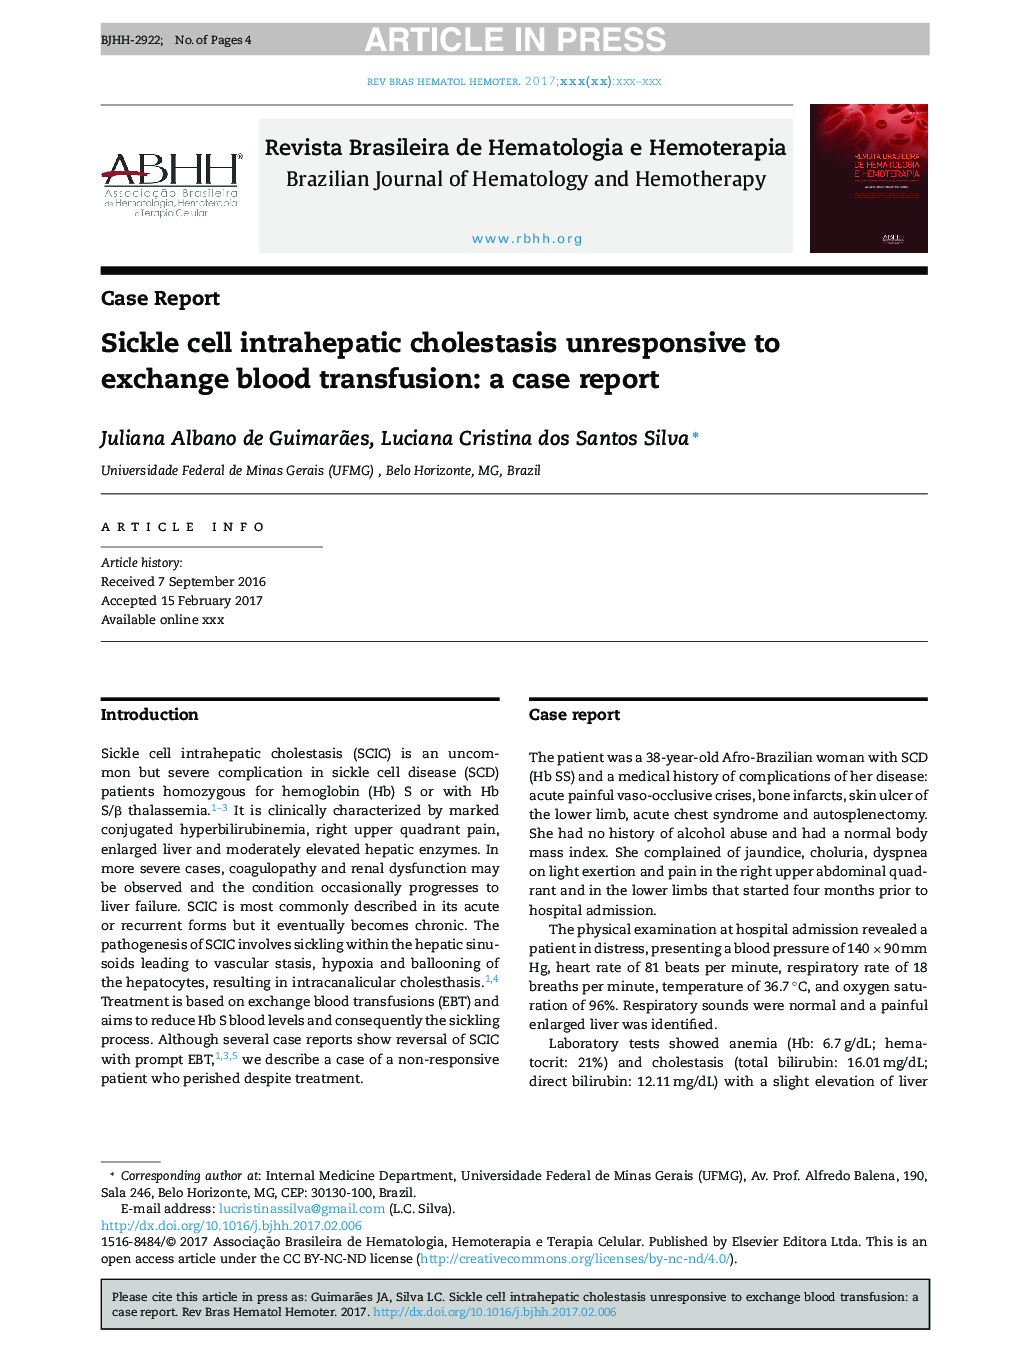 Sickle cell intrahepatic cholestasis unresponsive to exchange blood transfusion: a case report